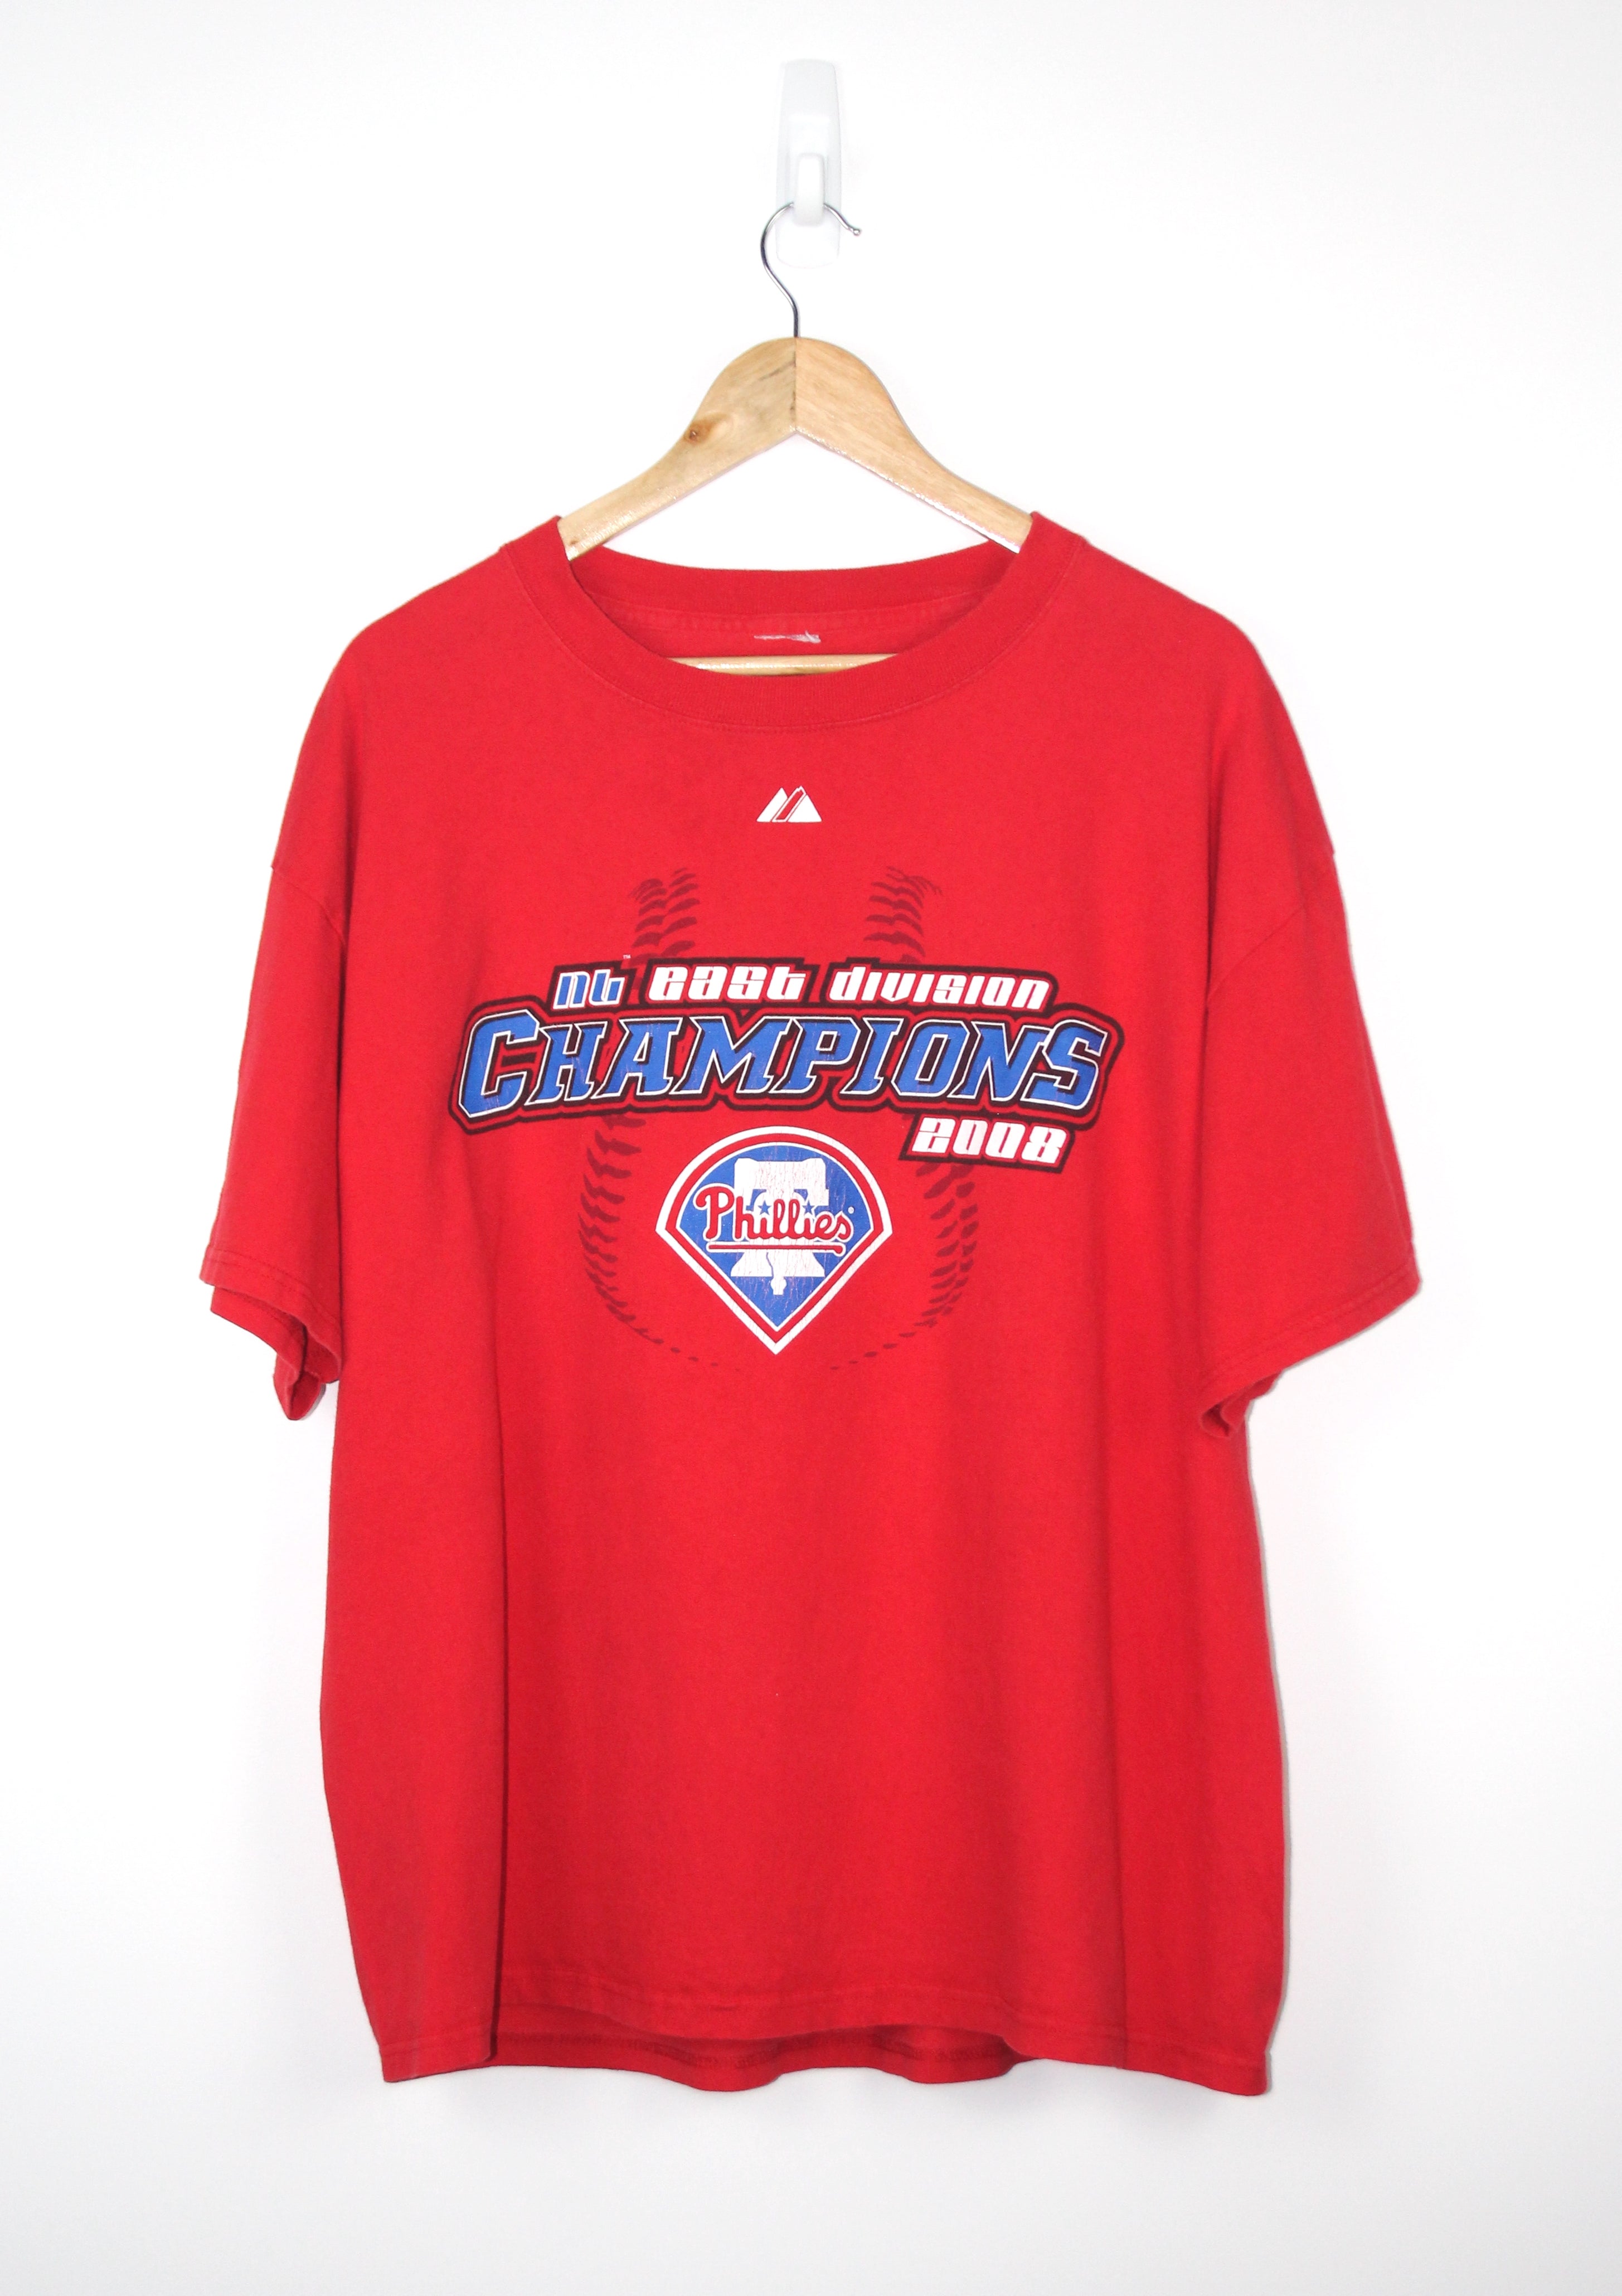 Official World champs party like its 2008 philadelphia phillies shirt -  CraftedstylesCotton